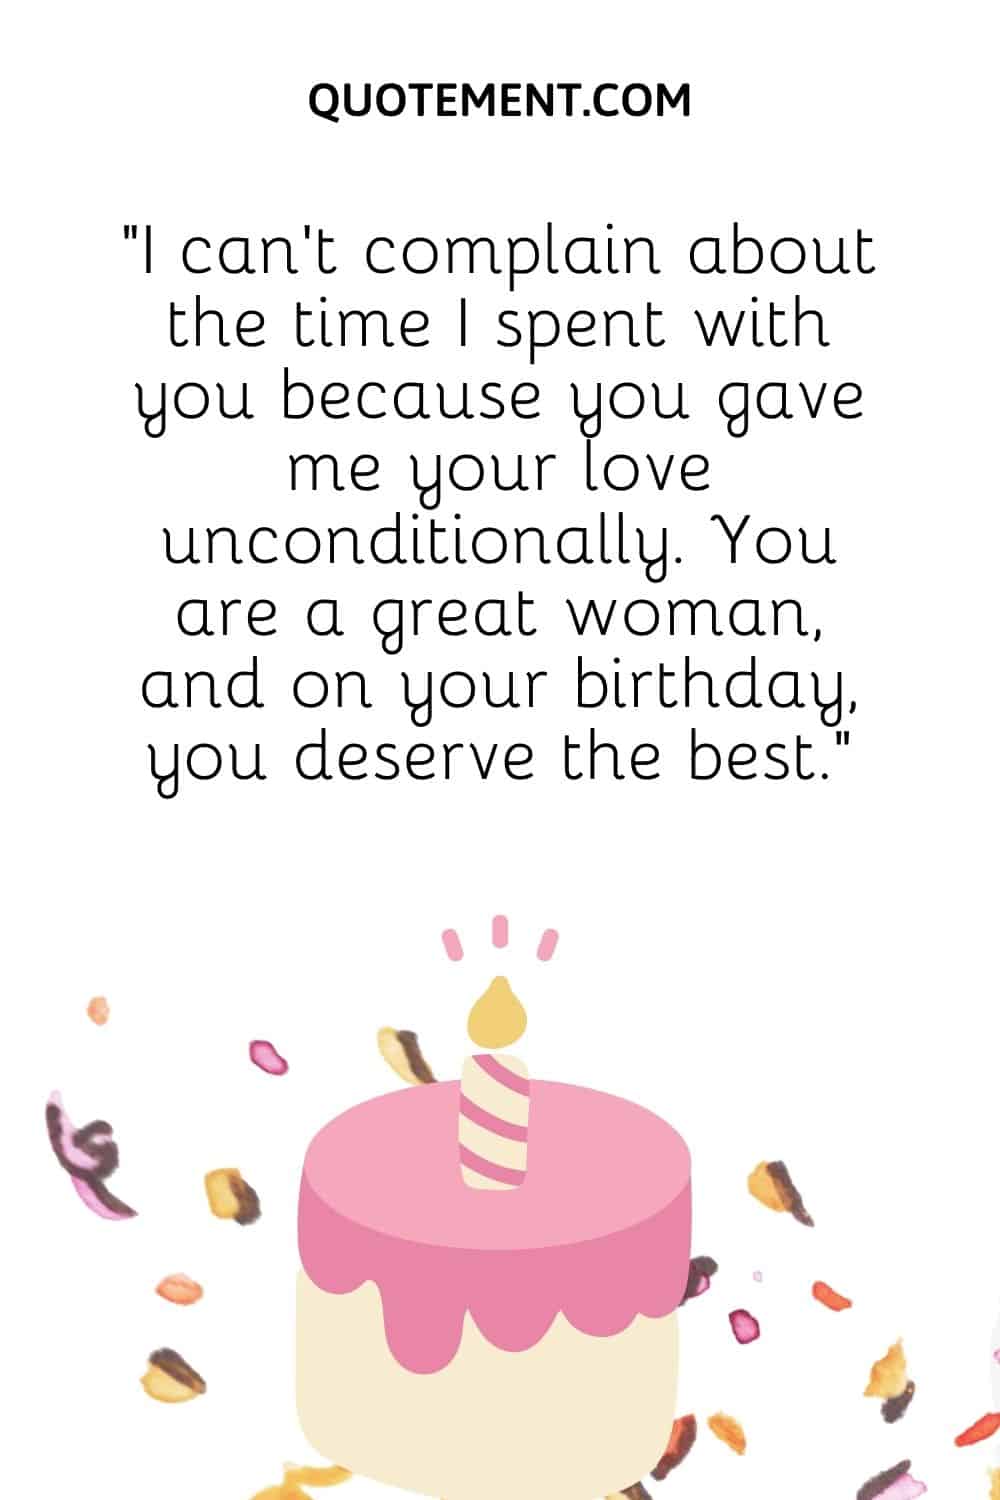 “I can’t complain about the time I spent with you because you gave me your love unconditionally. You are a great woman, and on your birthday, you deserve the best.”